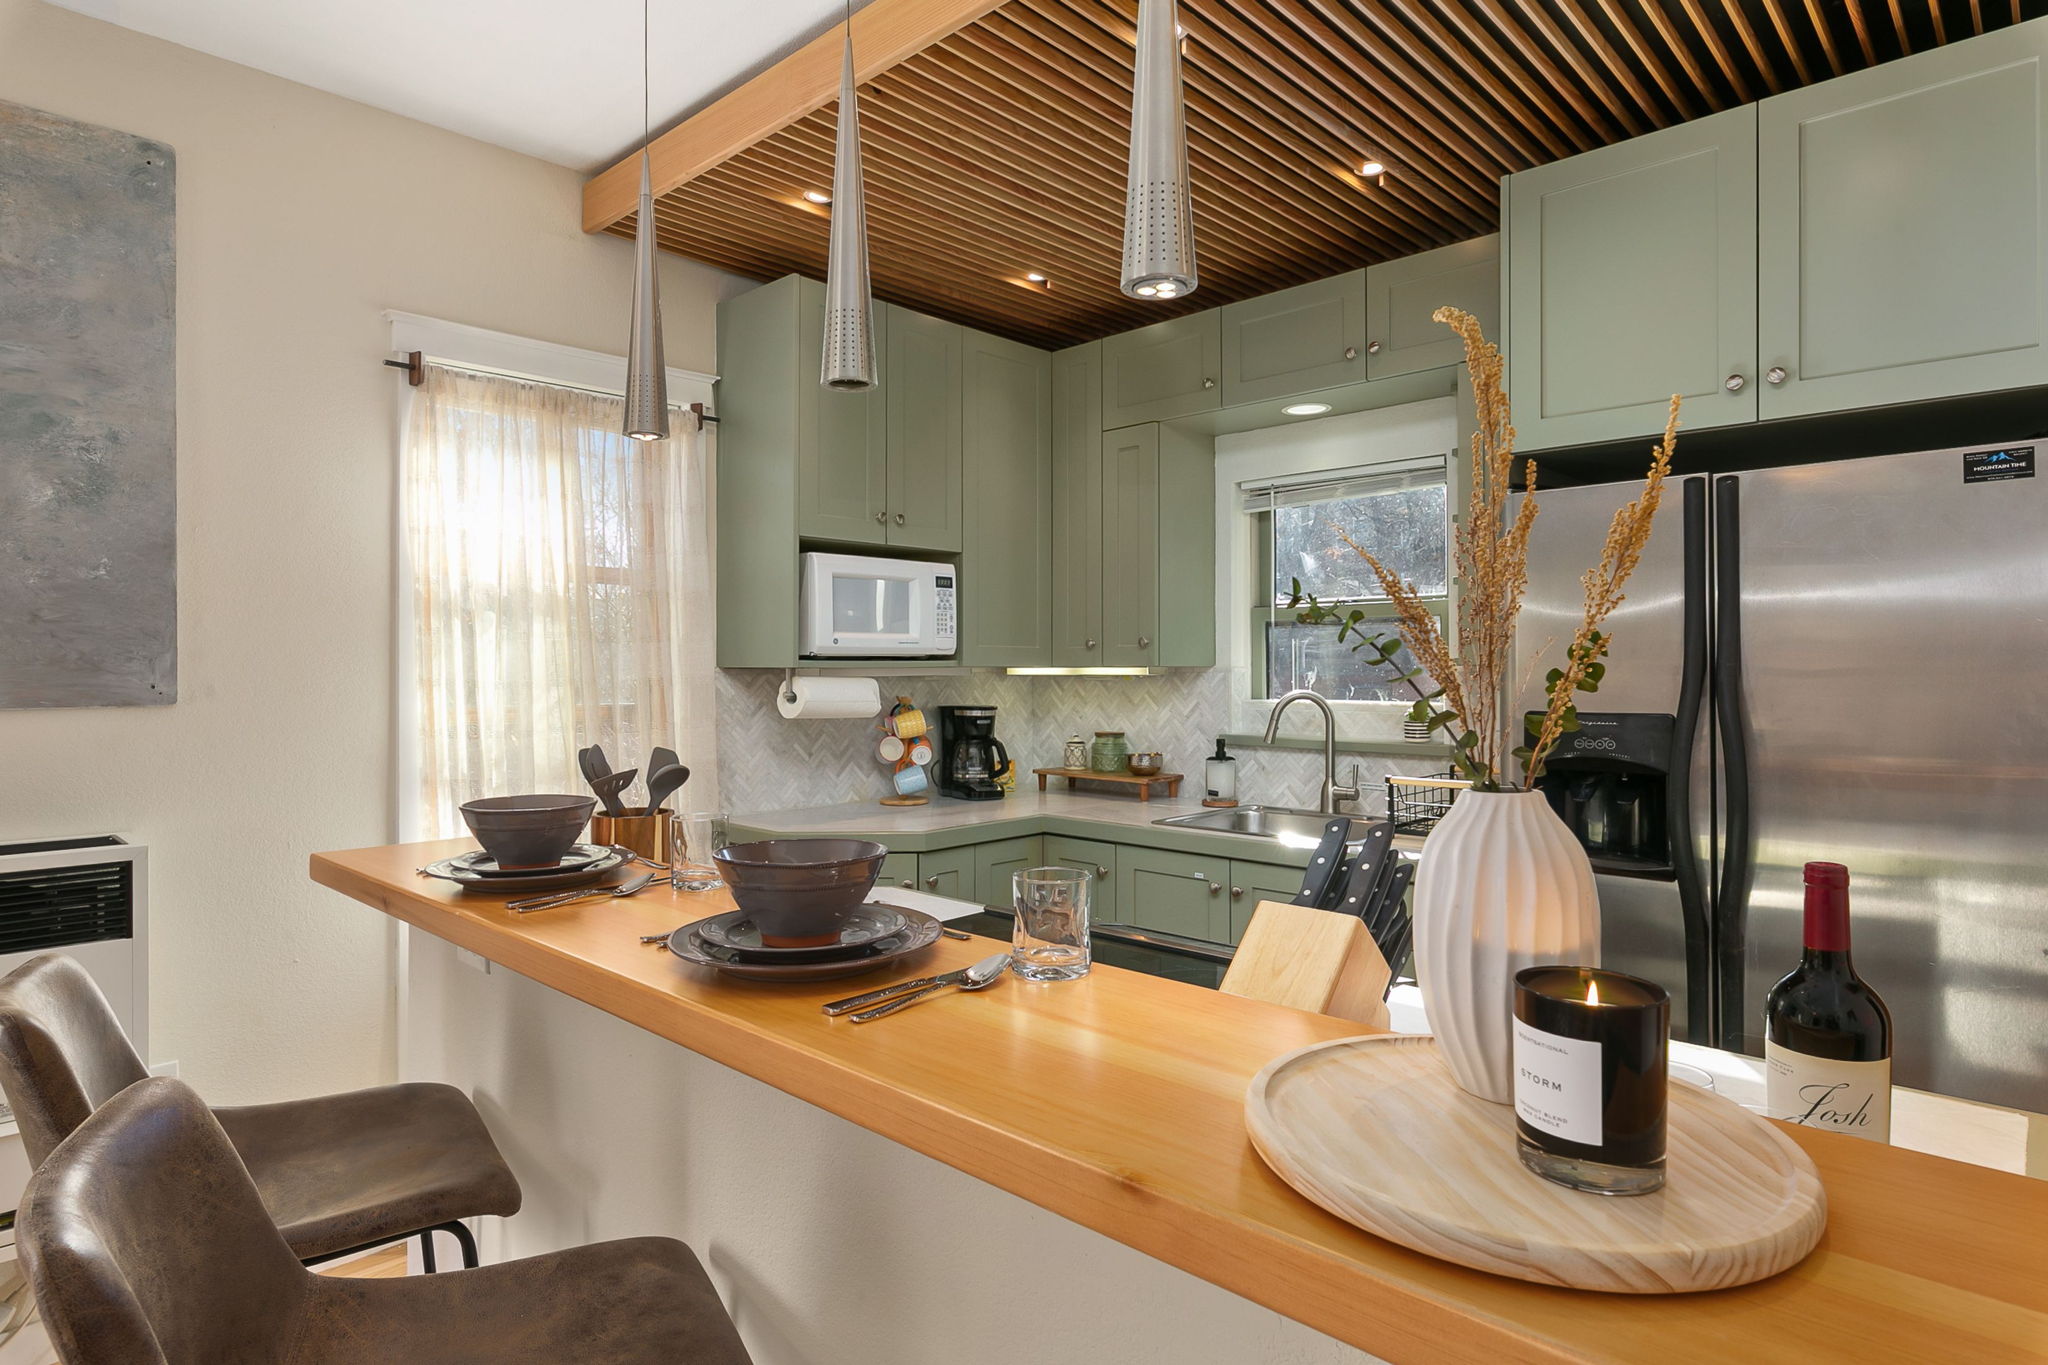 Bright and Airy Kitchen | Breakfast Bar with Seating for 3!